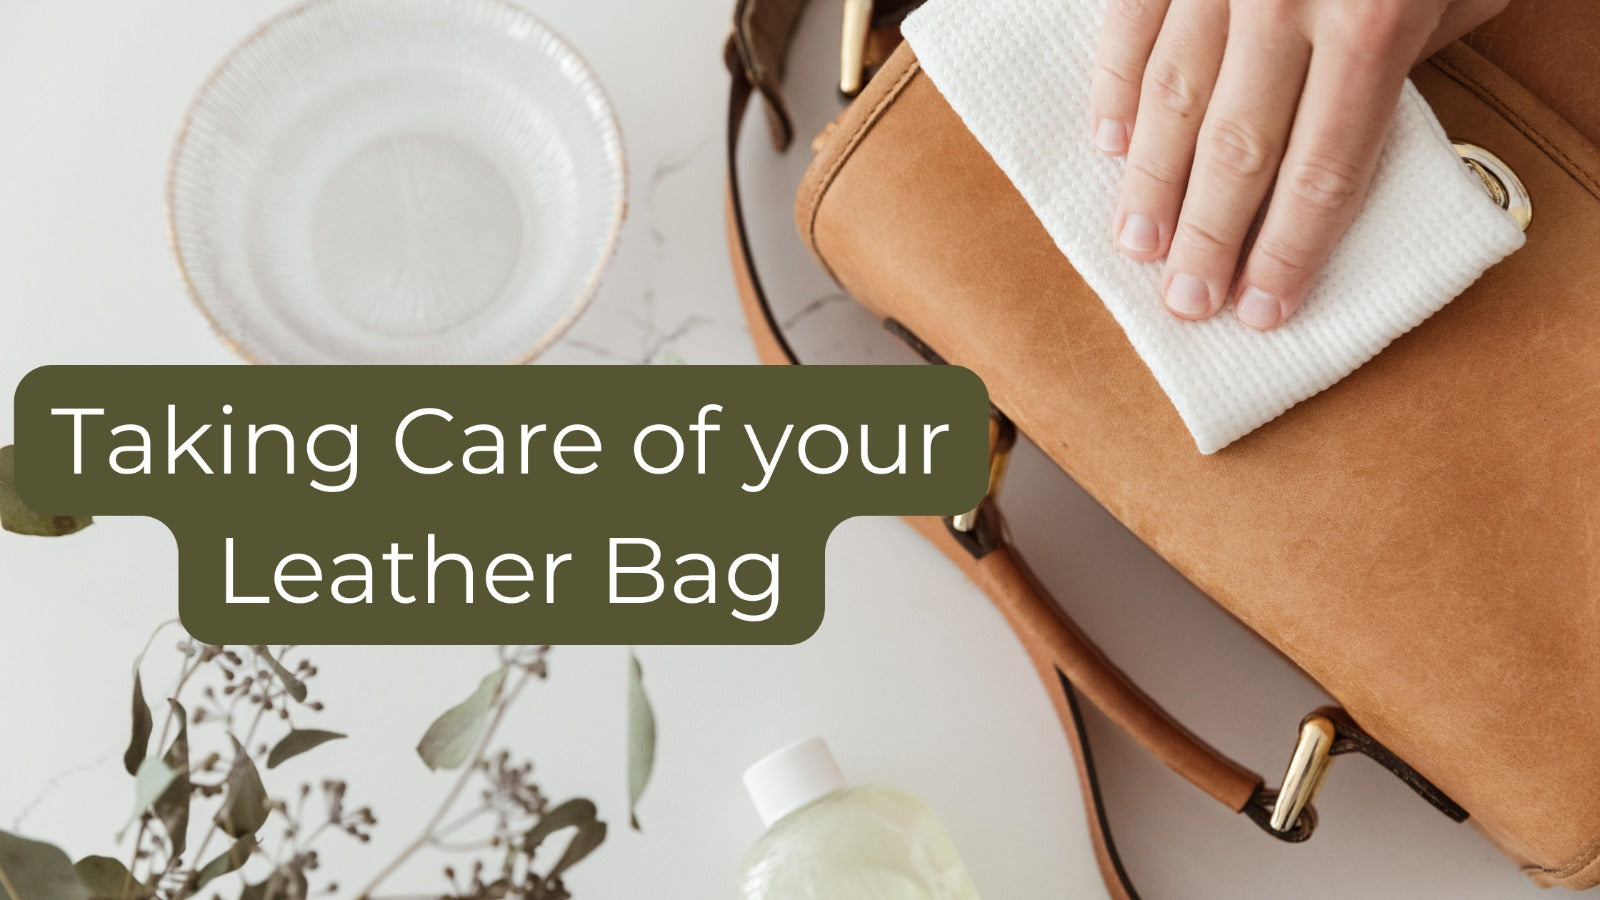 How to take care of a leather bag? : r/handbags